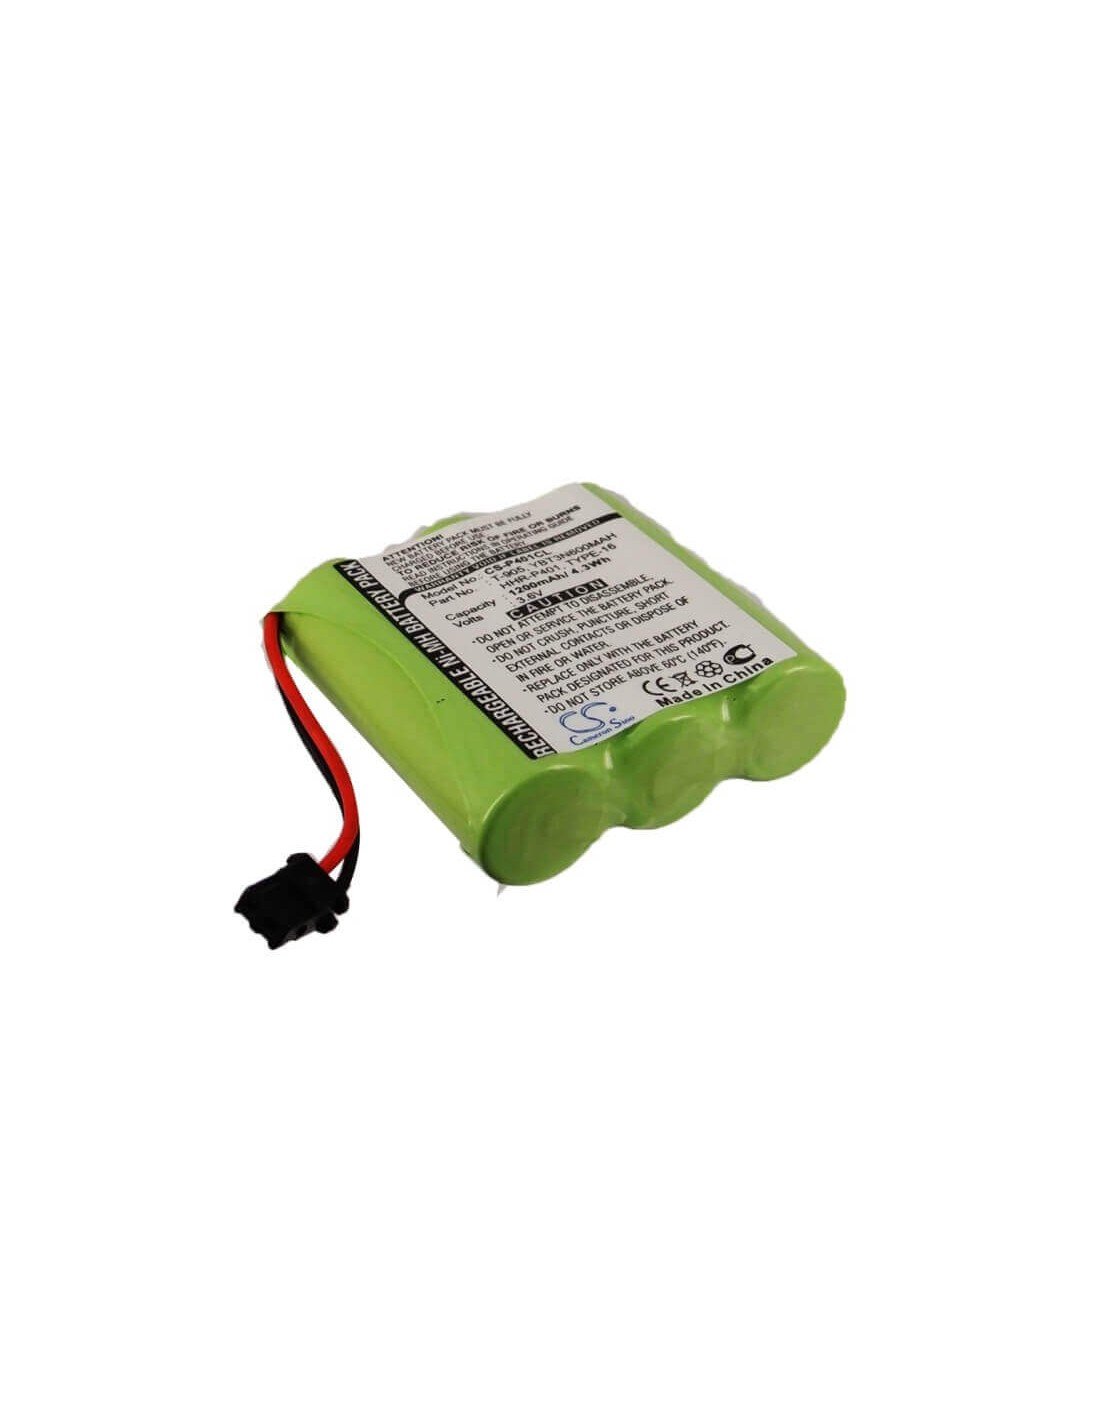 Battery for Bell South, Mph6928, Mph6929, Mph6935, 3.6V, 1200mAh - 4.32Wh